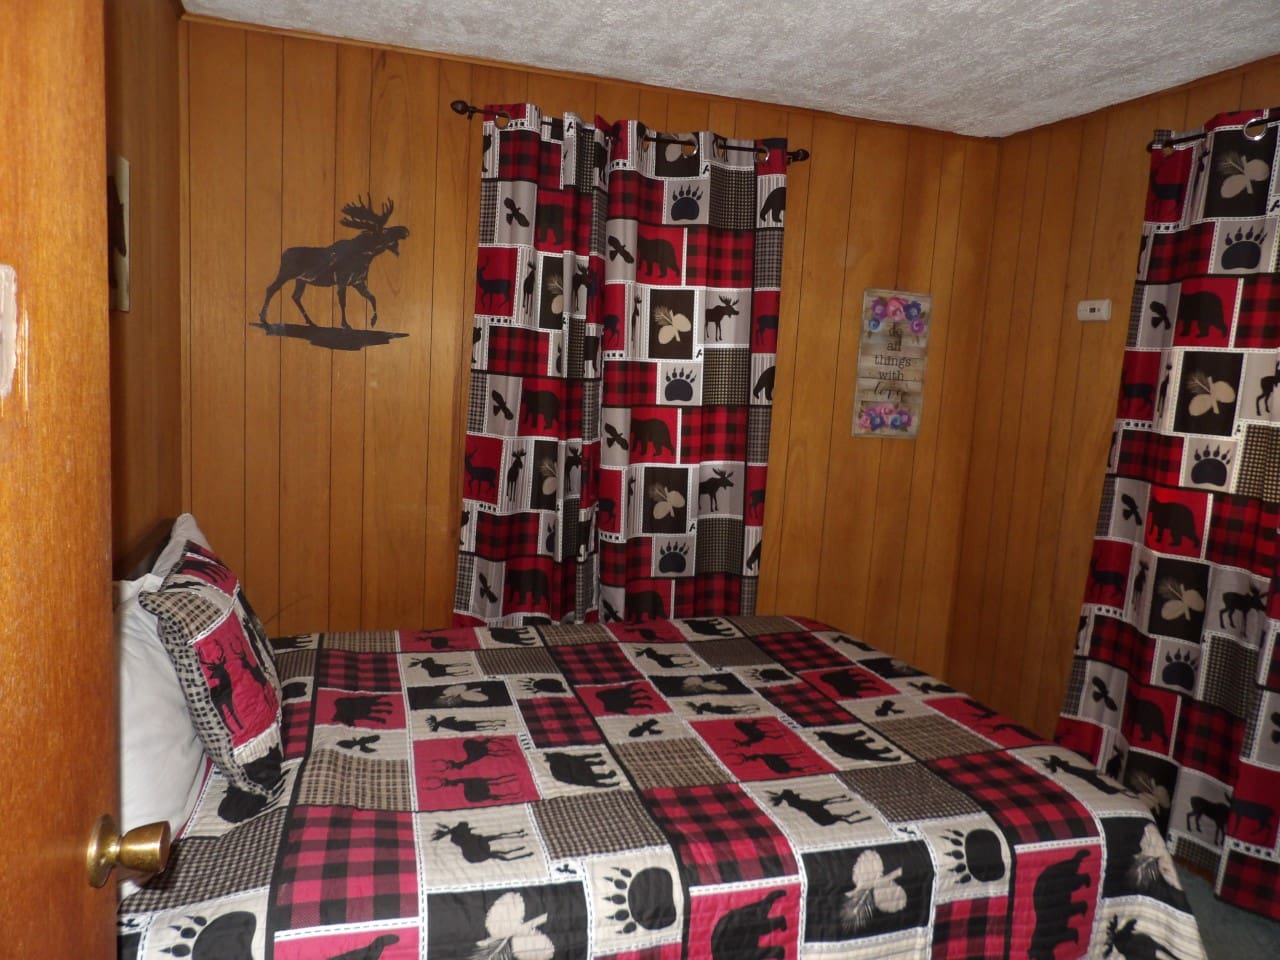 A bedroom with a bed, two pillows and a moose on the wall.